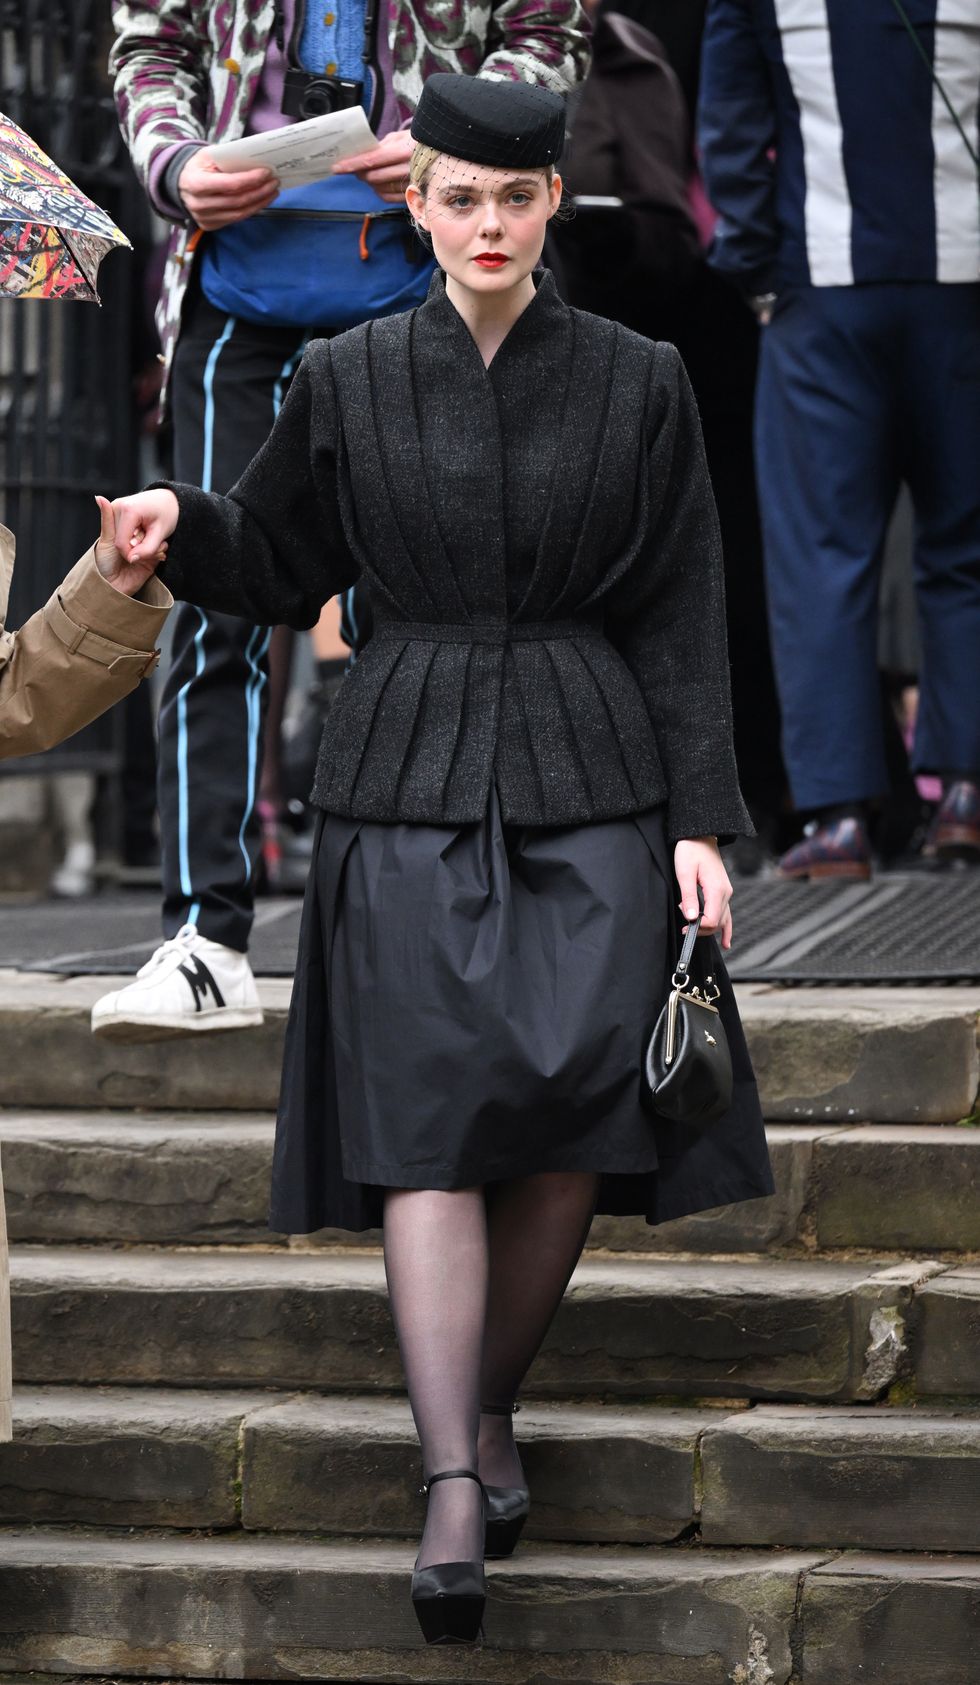 london, england february 16 elle fanning attends the memorial service for dame vivienne westwood at southwark cathedral on february 16, 2023 in london, england british fashion designer dame vivienne westwood, known for her punk and new wave designs, died on december 29 at the age of 81 photo by karwai tangwireimage